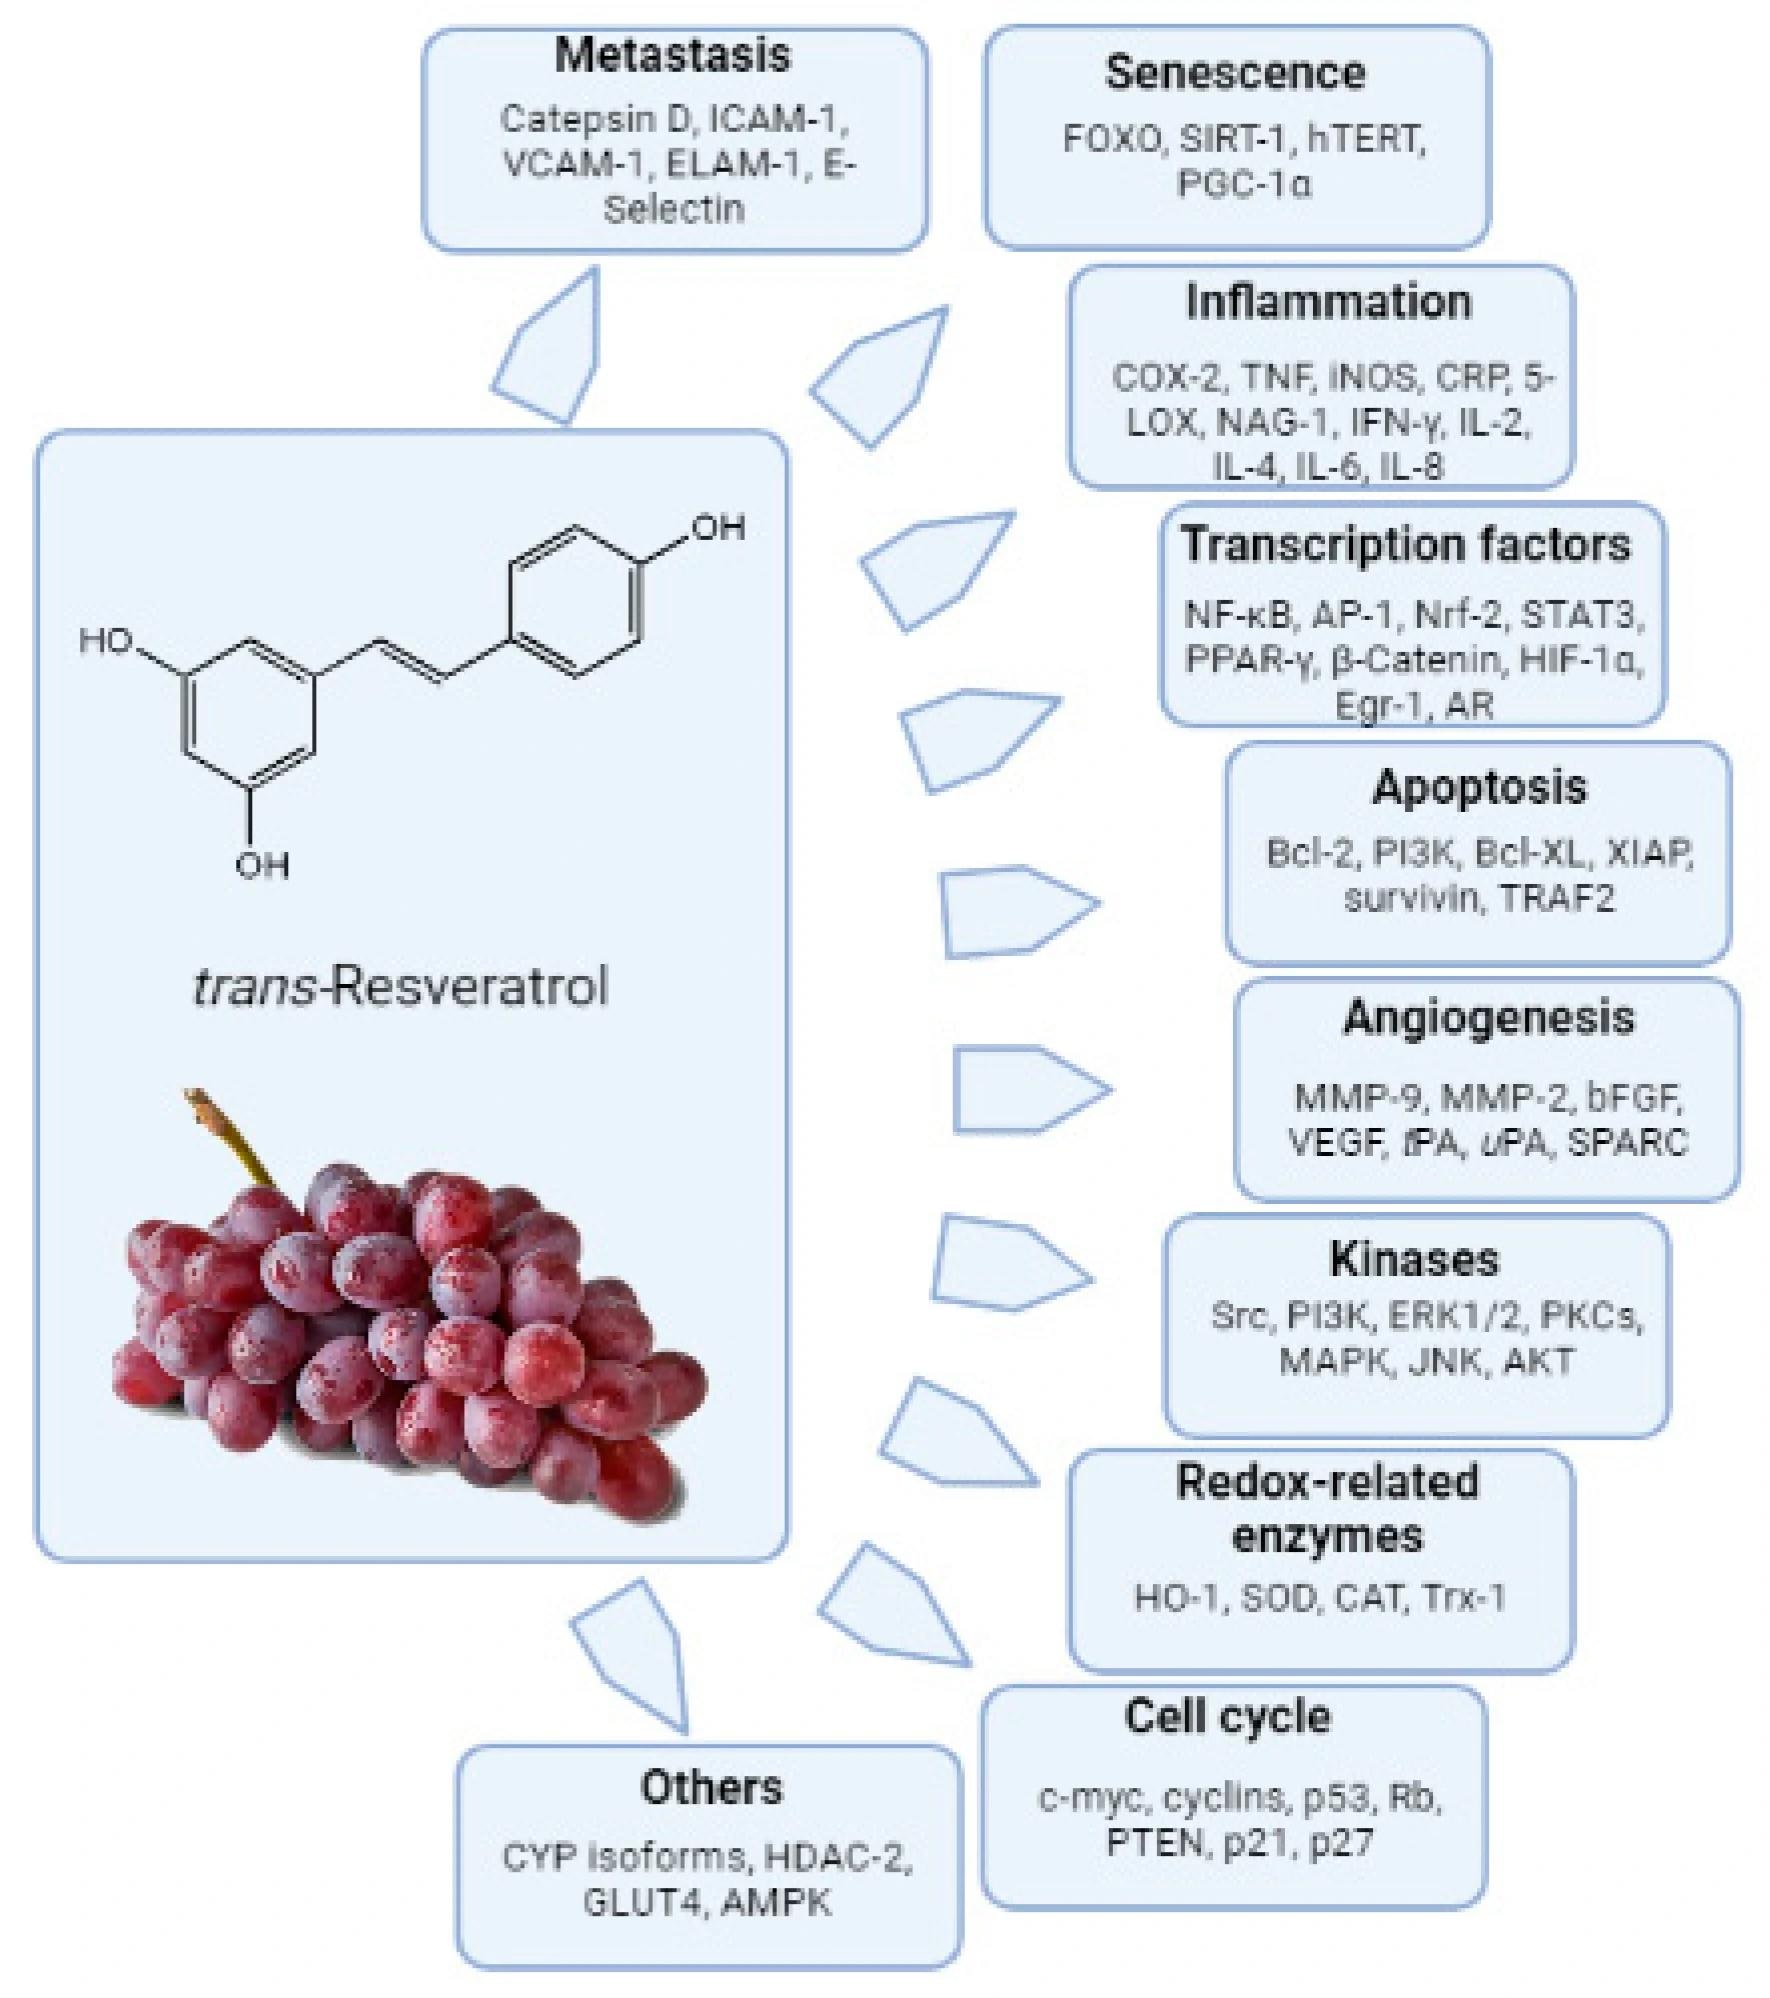 Resveratrol-modulated biochemical targets. AP-1, activator protein 1; CAT, catalase; CDK, cyclin dependent kinase; COX, cyclooxygenase; CRP, C-reactive protein; CYP, cytochrome P450; ER, estrogen receptor; ERK, extra cellularly regulated kinase; GPx, glutathione peroxidase; HIF, hypoxia inducing factor; hTERT, human telomerase reverse transcriptase; ICAM, intracellular adhesion molecule; IAP, inhibitor of apoptosis proteins; iNOS, inducible nitric oxide; MAPK, mitogen activated protein kinase; MMP, matrix metalloproteinase; NFκB, nuclear factor kappa B; PI3K, phosphoinositide-3 kinase; Rb, retinoblastoma; SOD, superoxide dismutase; STAT, signal transducer and activator of transcription; SPARC, secreted protein acidic and rich in cysteine; TNF, tumor necrosis factor; VEGF, vascular endothelial growth factor.